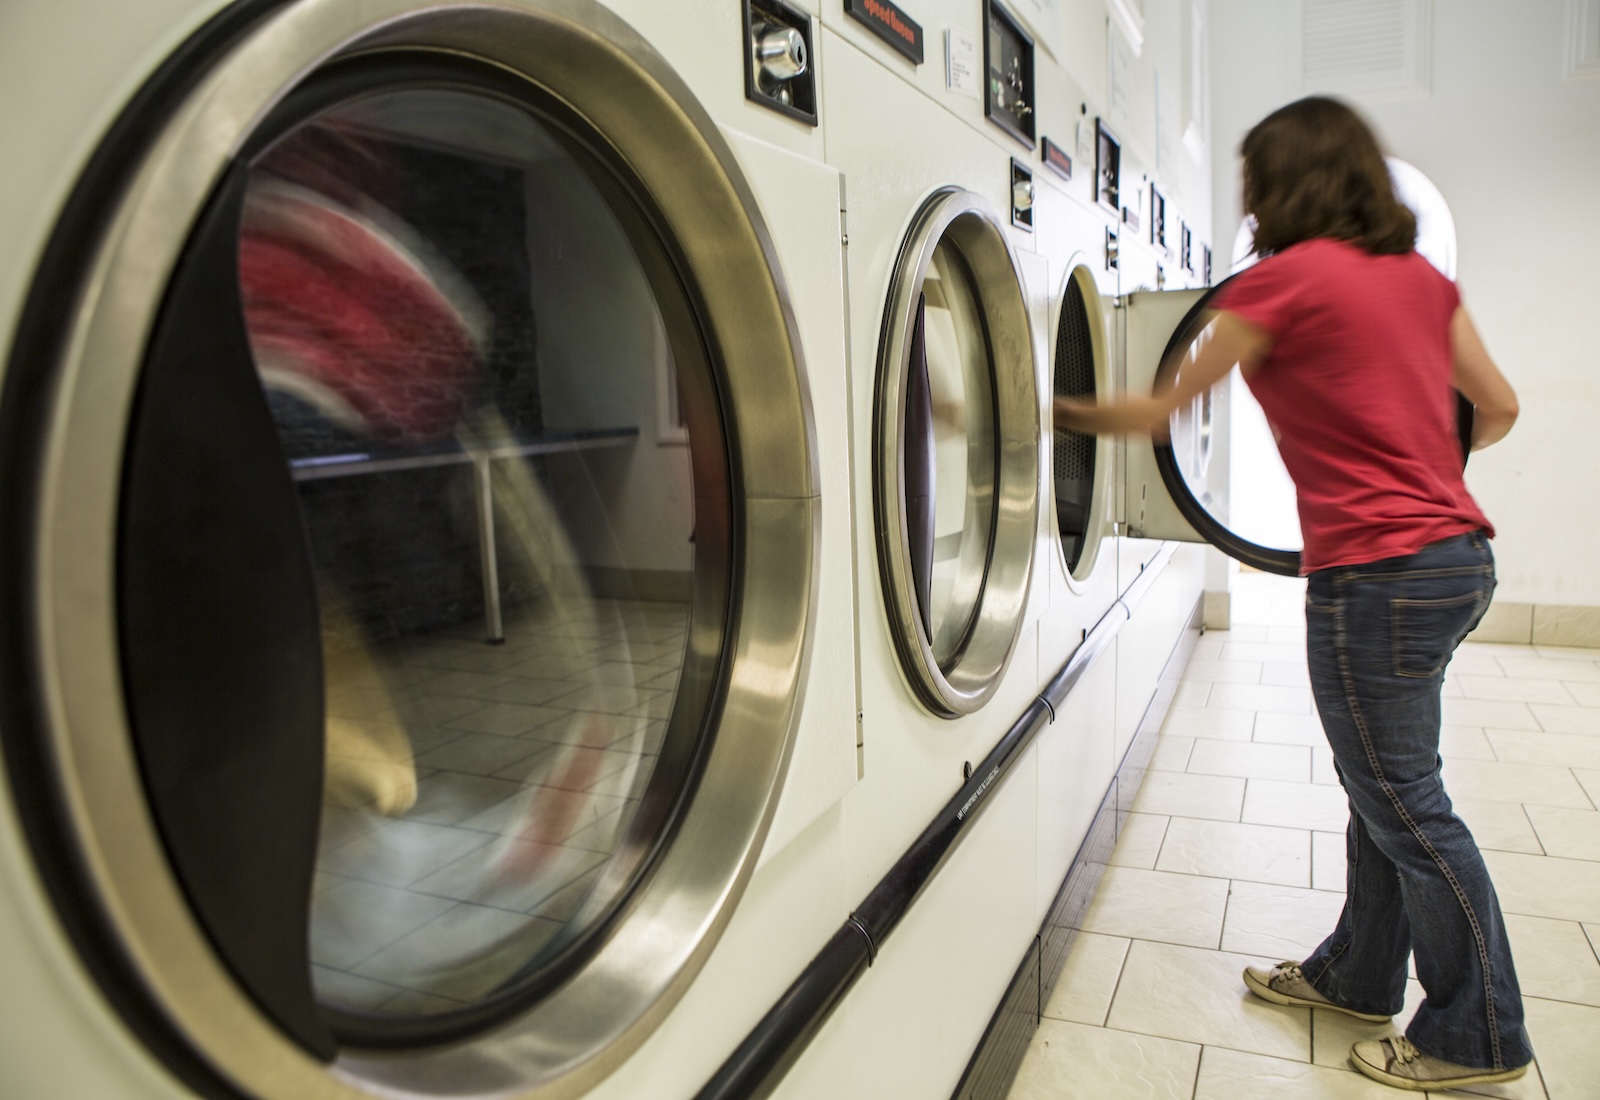 Woman removes laundry from a washing machine.